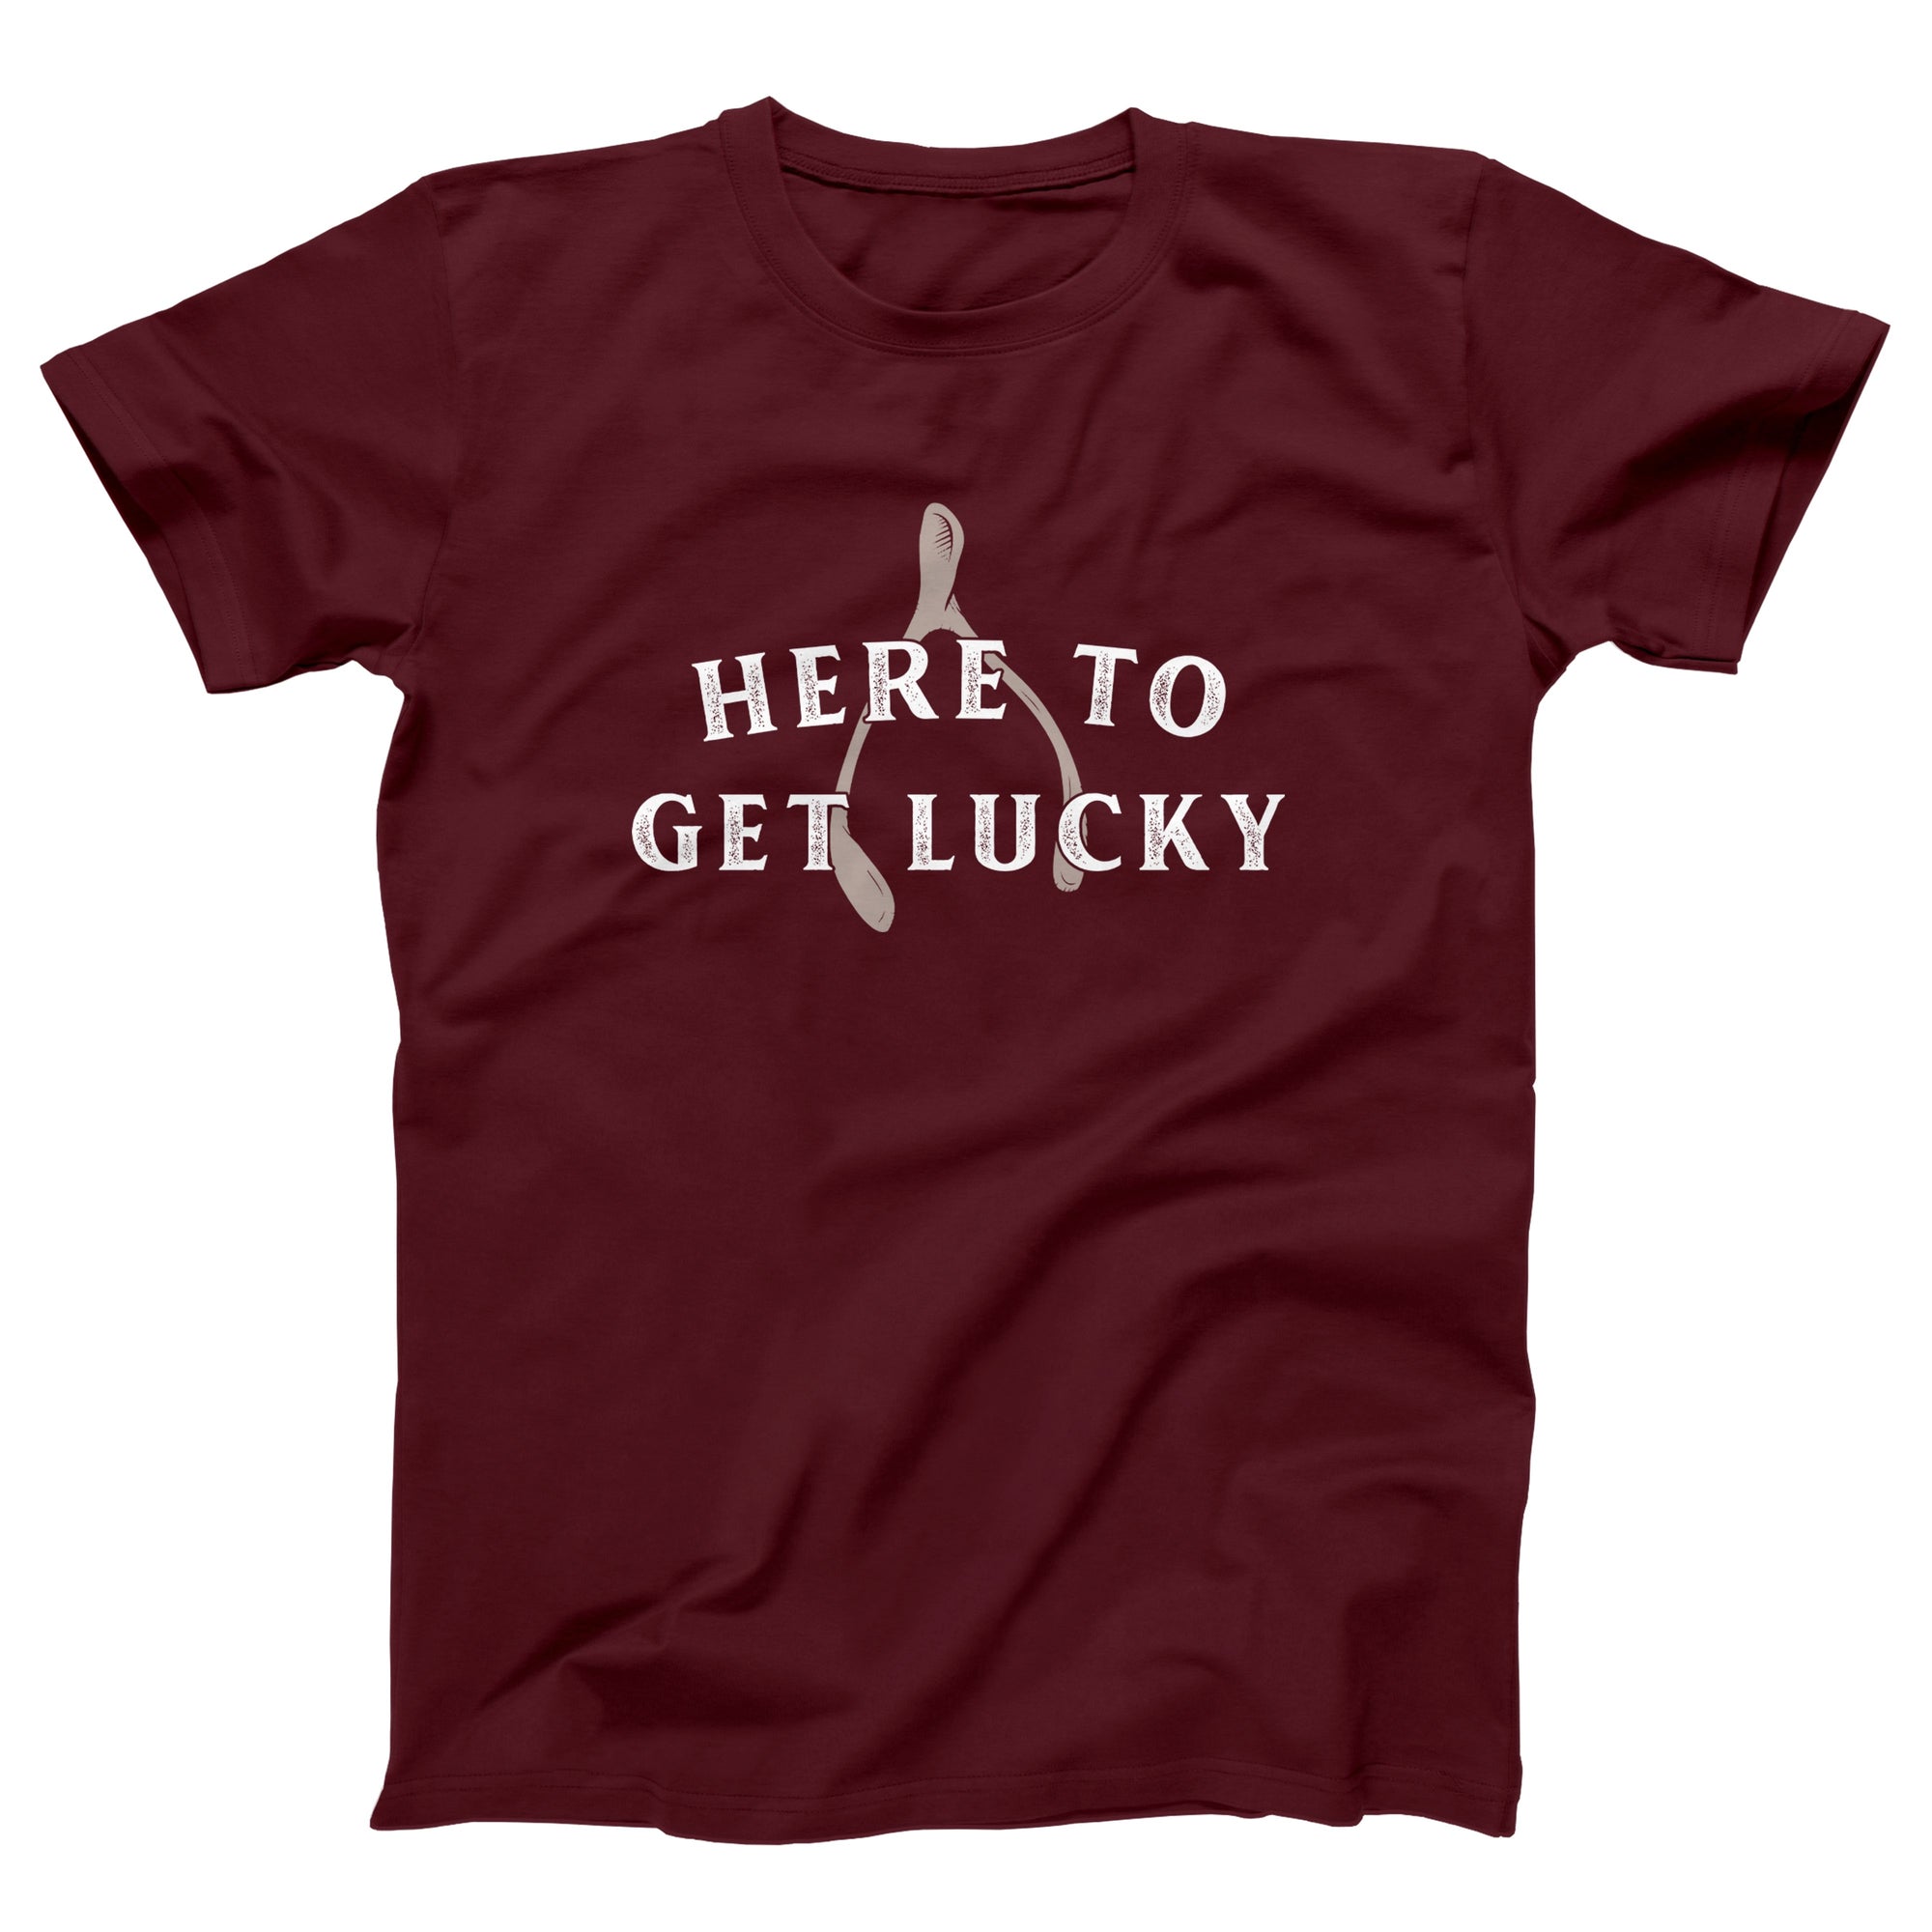 Here To Get Lucky Adult Unisex T-Shirt - anishphilip